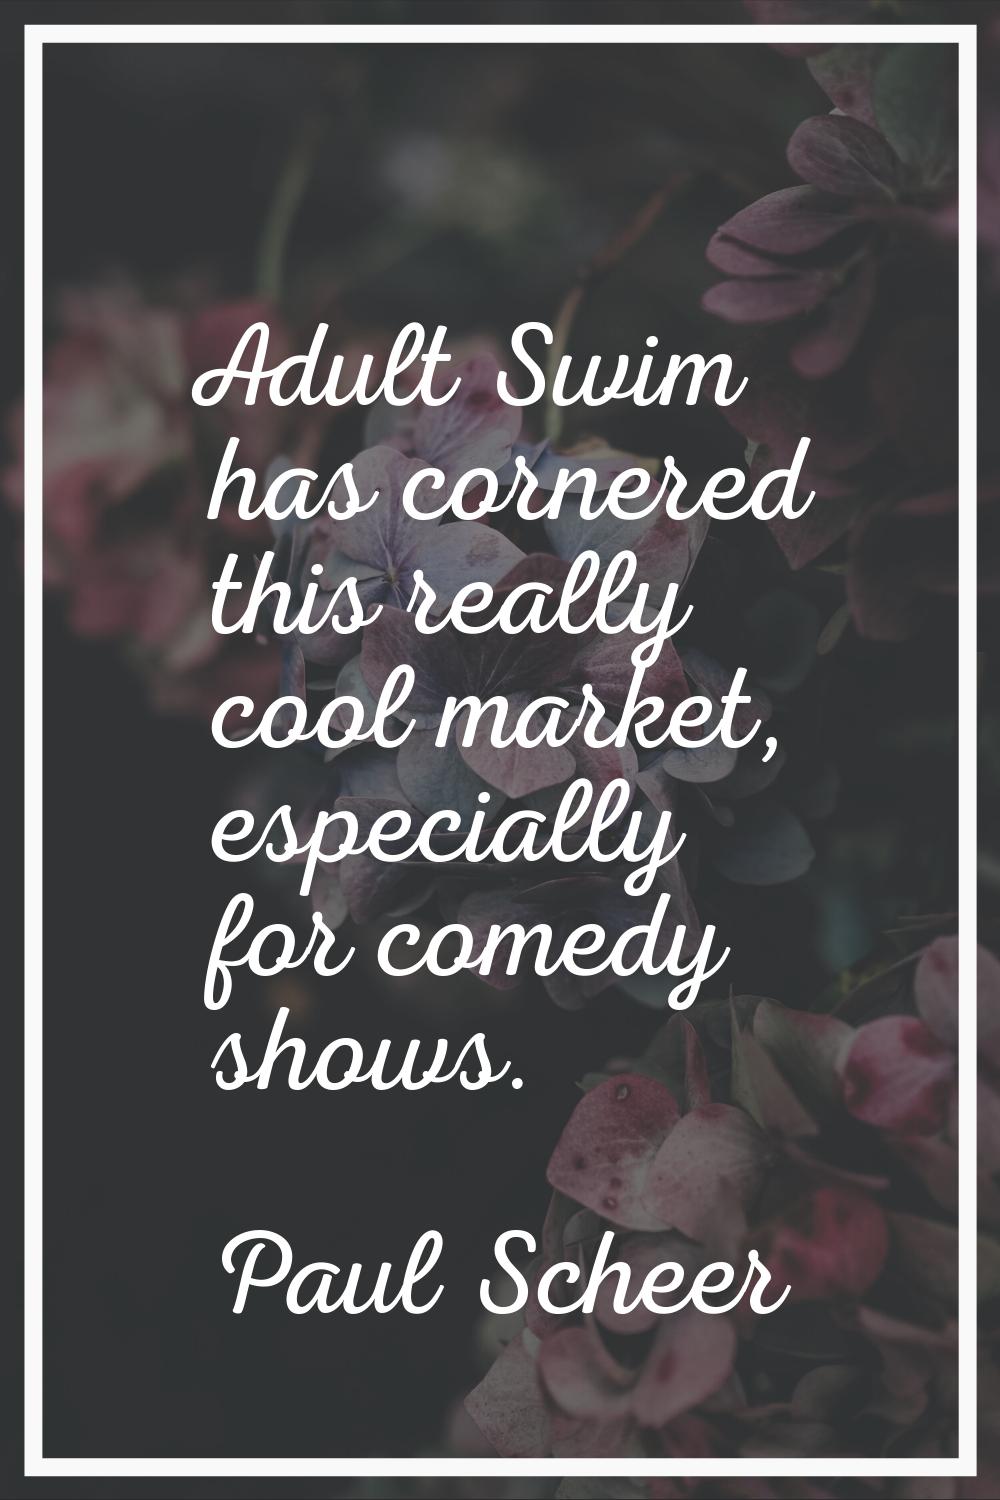 Adult Swim has cornered this really cool market, especially for comedy shows.